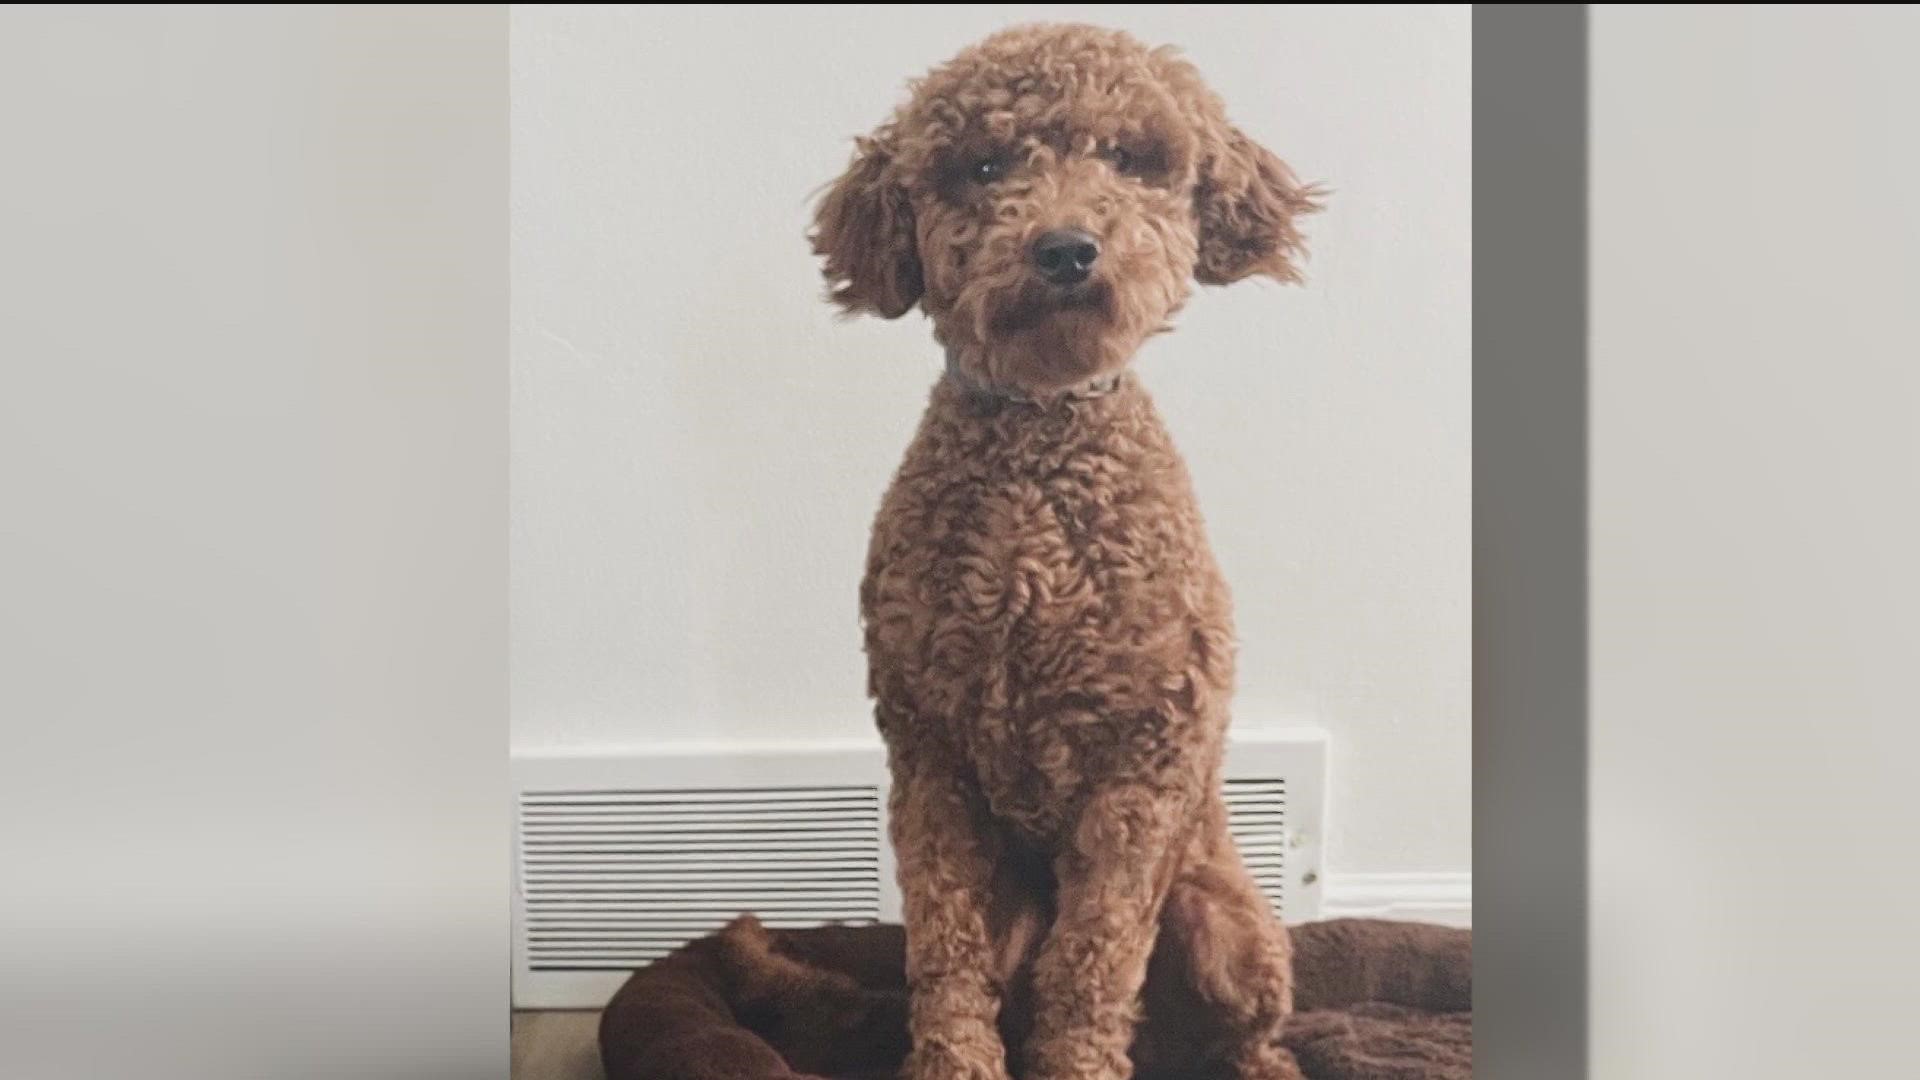 A family from Utah is desperate to find their Goldendoodle puppy after it was stolen from their campsite while visiting San Diego.